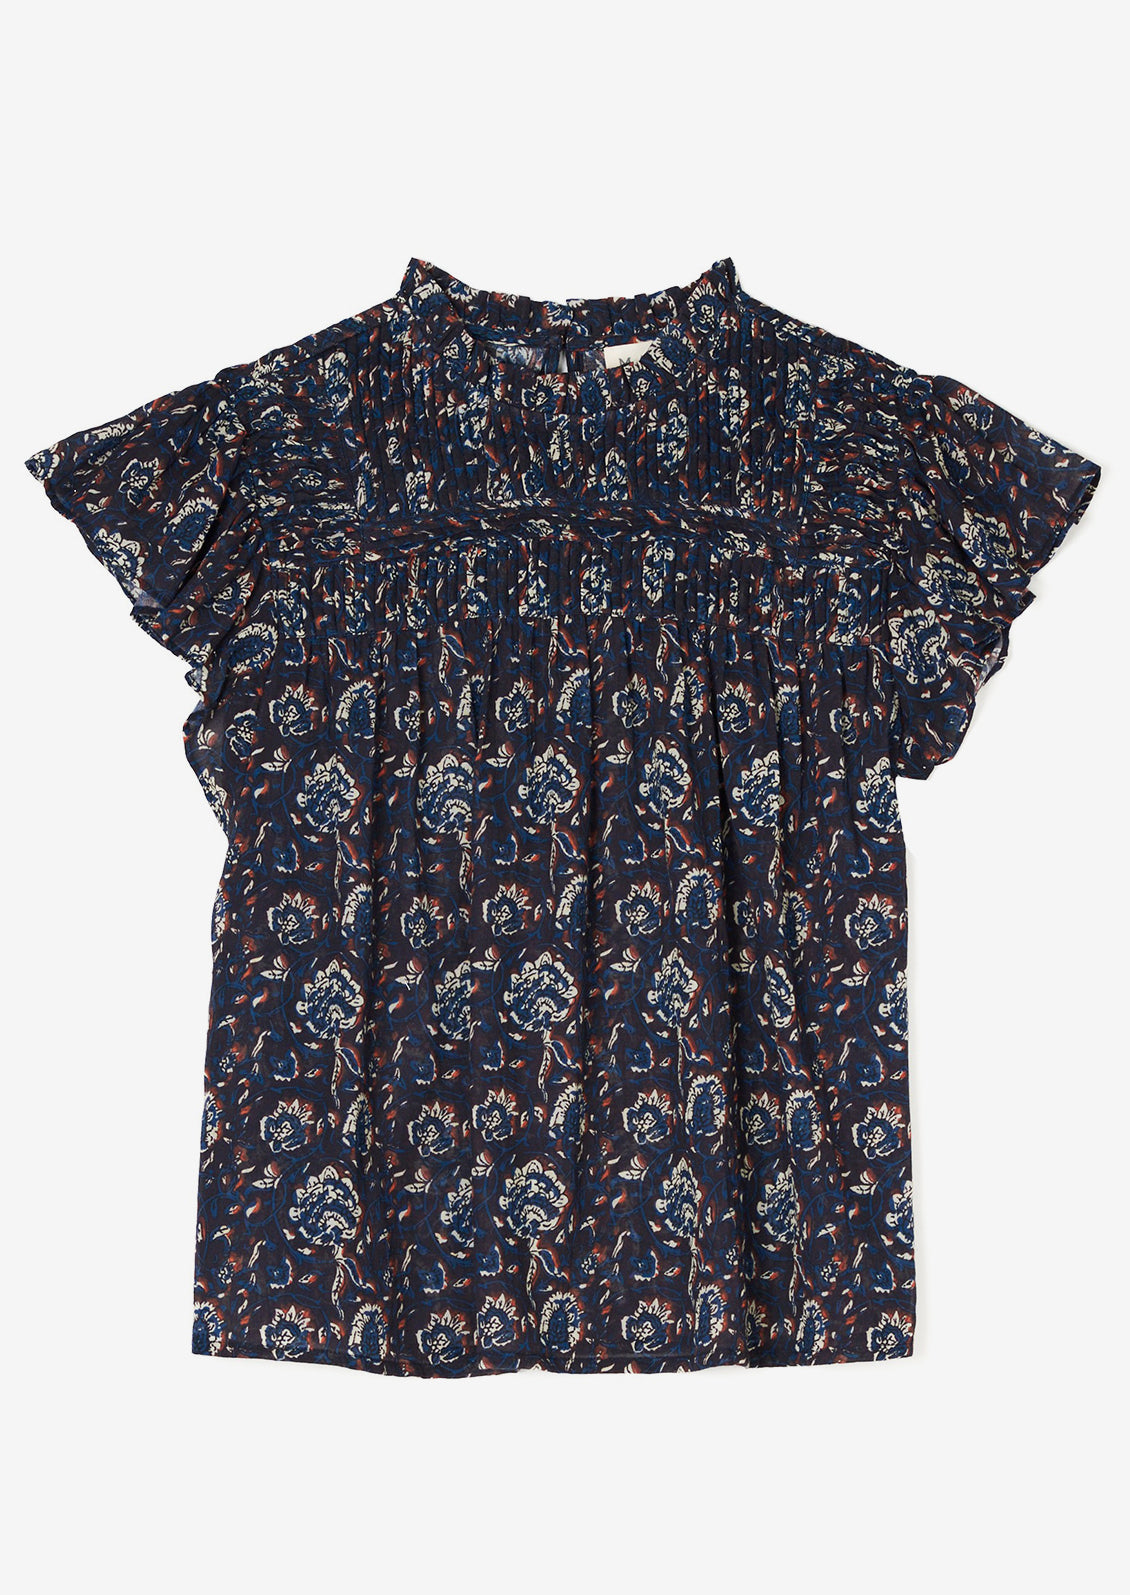 A blue, white and rust floral printed flutter sleeve top.